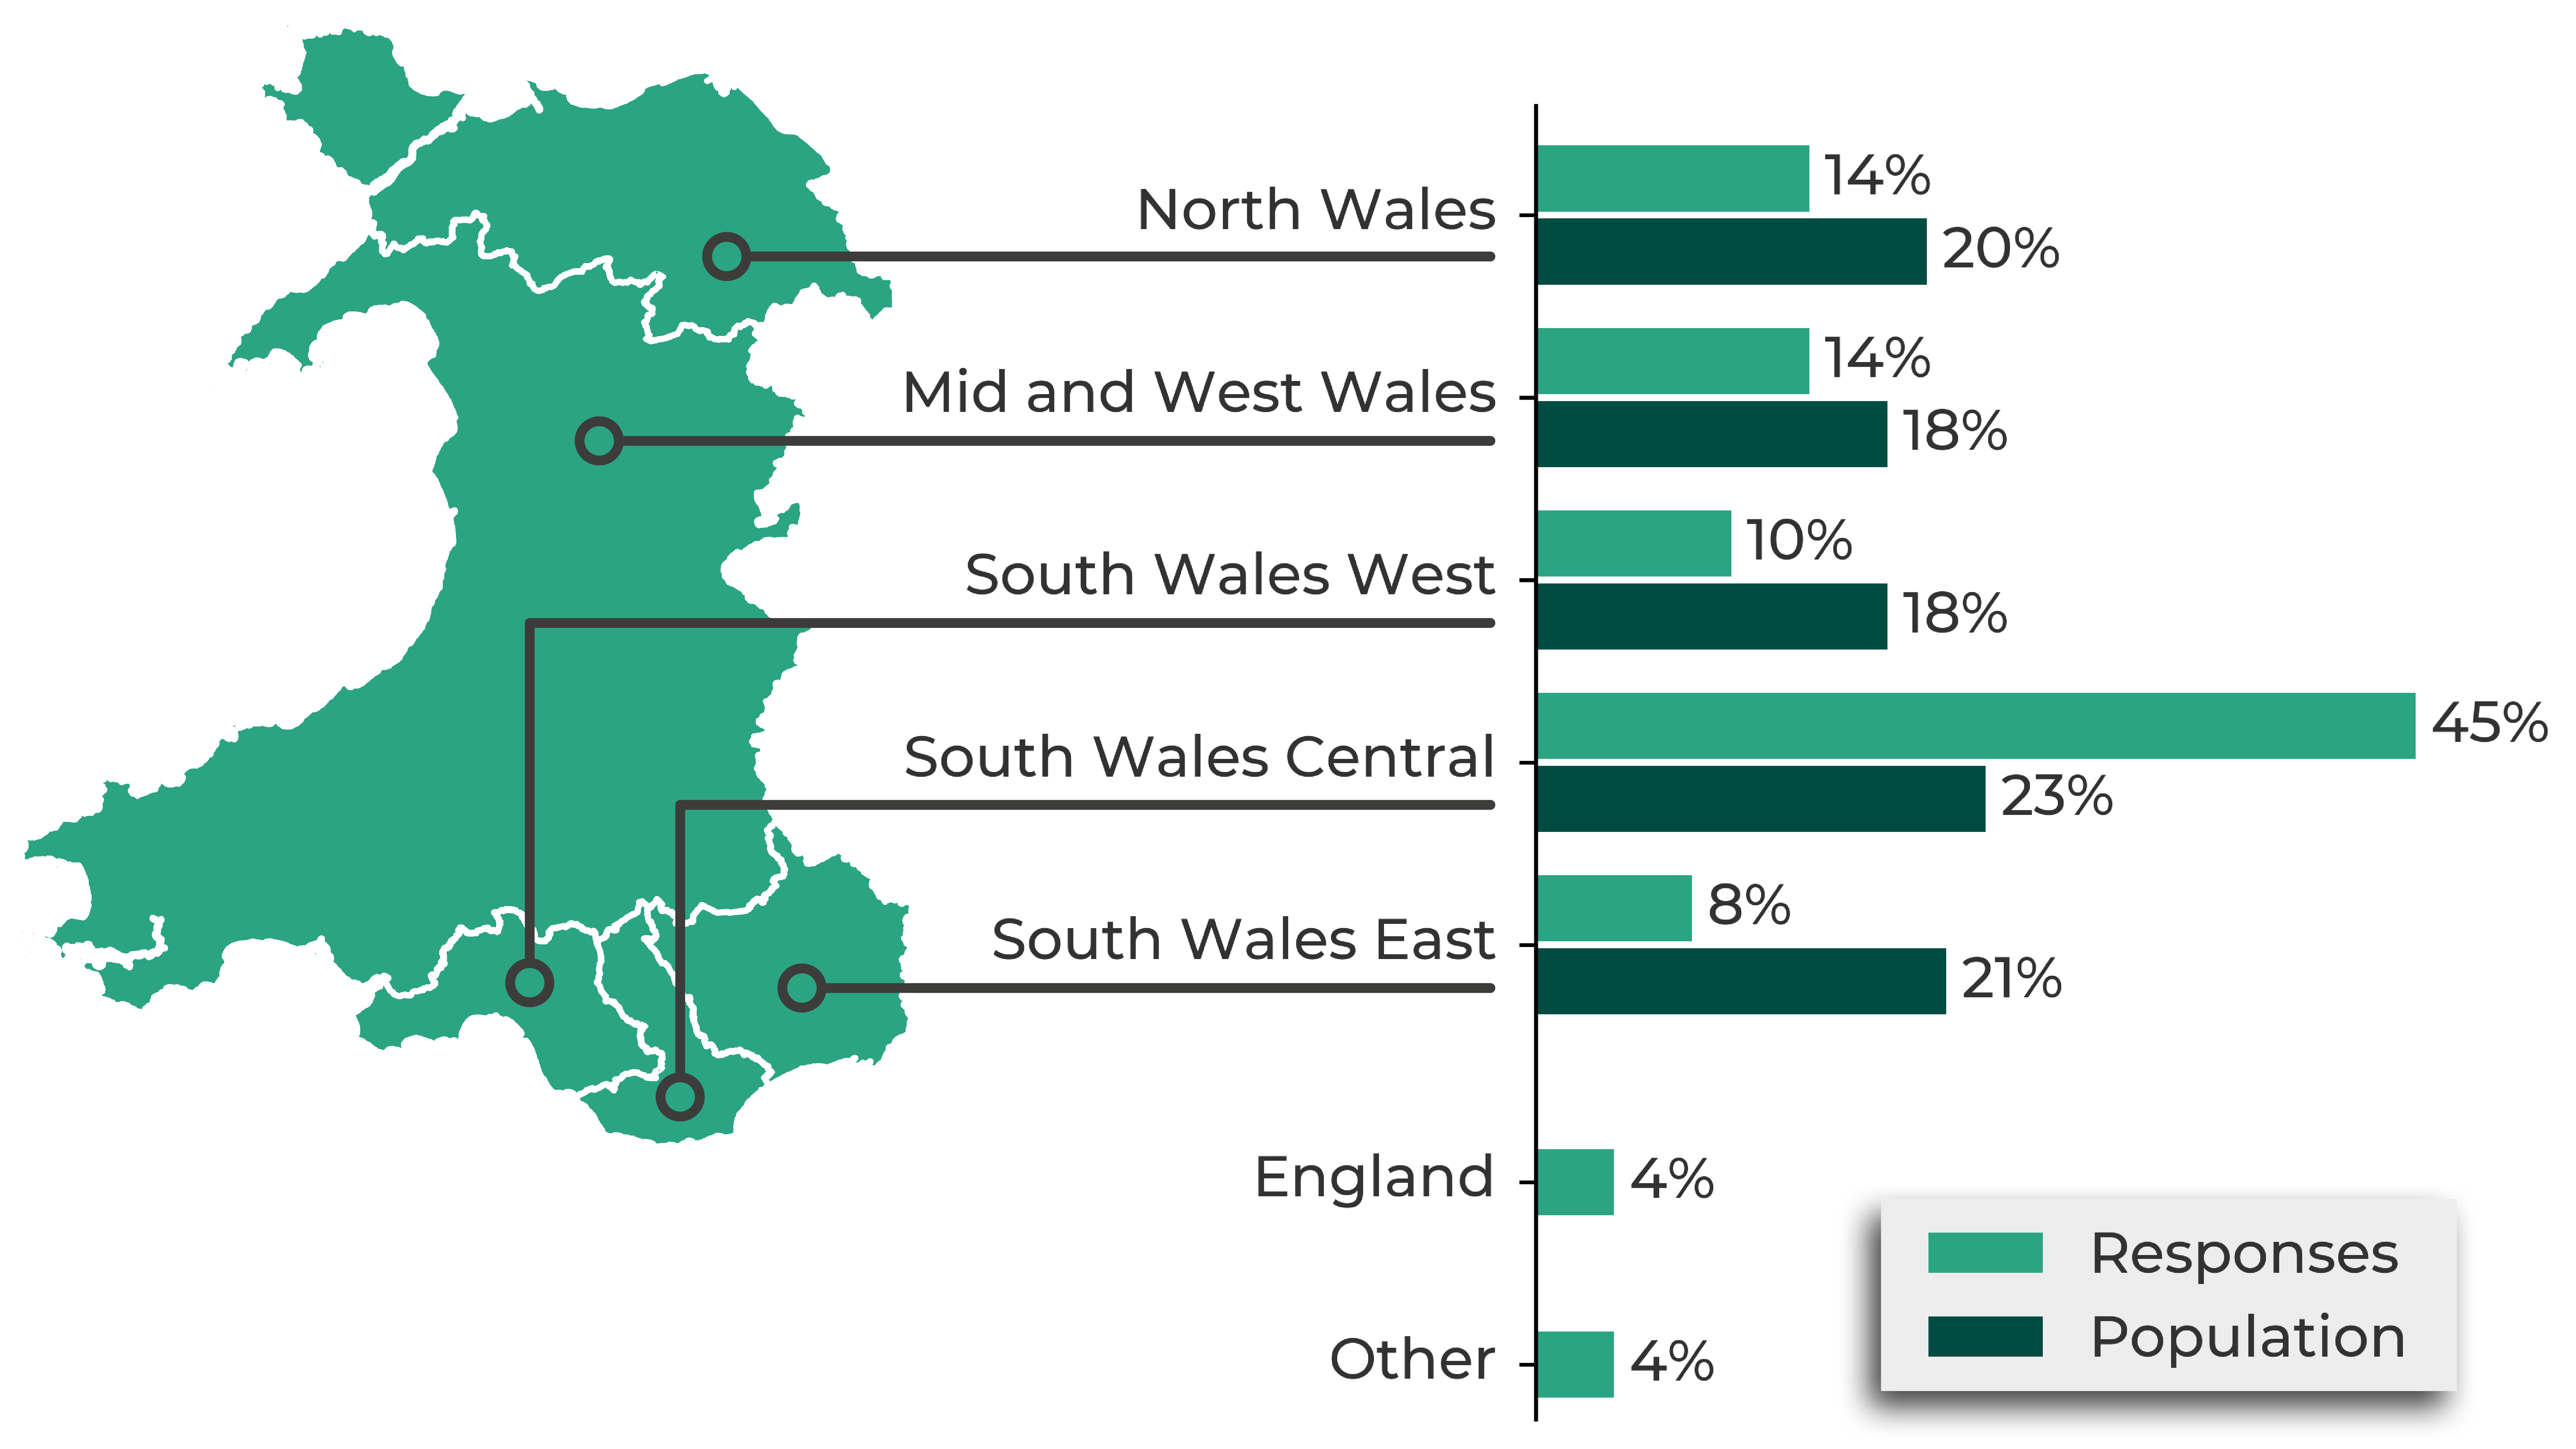 A map and graph showing the distribution of survey respondents compared to the population, by Welsh region. North Wales: 14% of responses, 20% of population. Mid and West Wales: 14% of responses, 18% of population. South Wales West: 10% of responses, 18% of population. South Wales Central: 45% of responses, 23% of population. South Wales East: 8% of responses, 21% of population. England: 4% of responses. Other: 4% of responses.